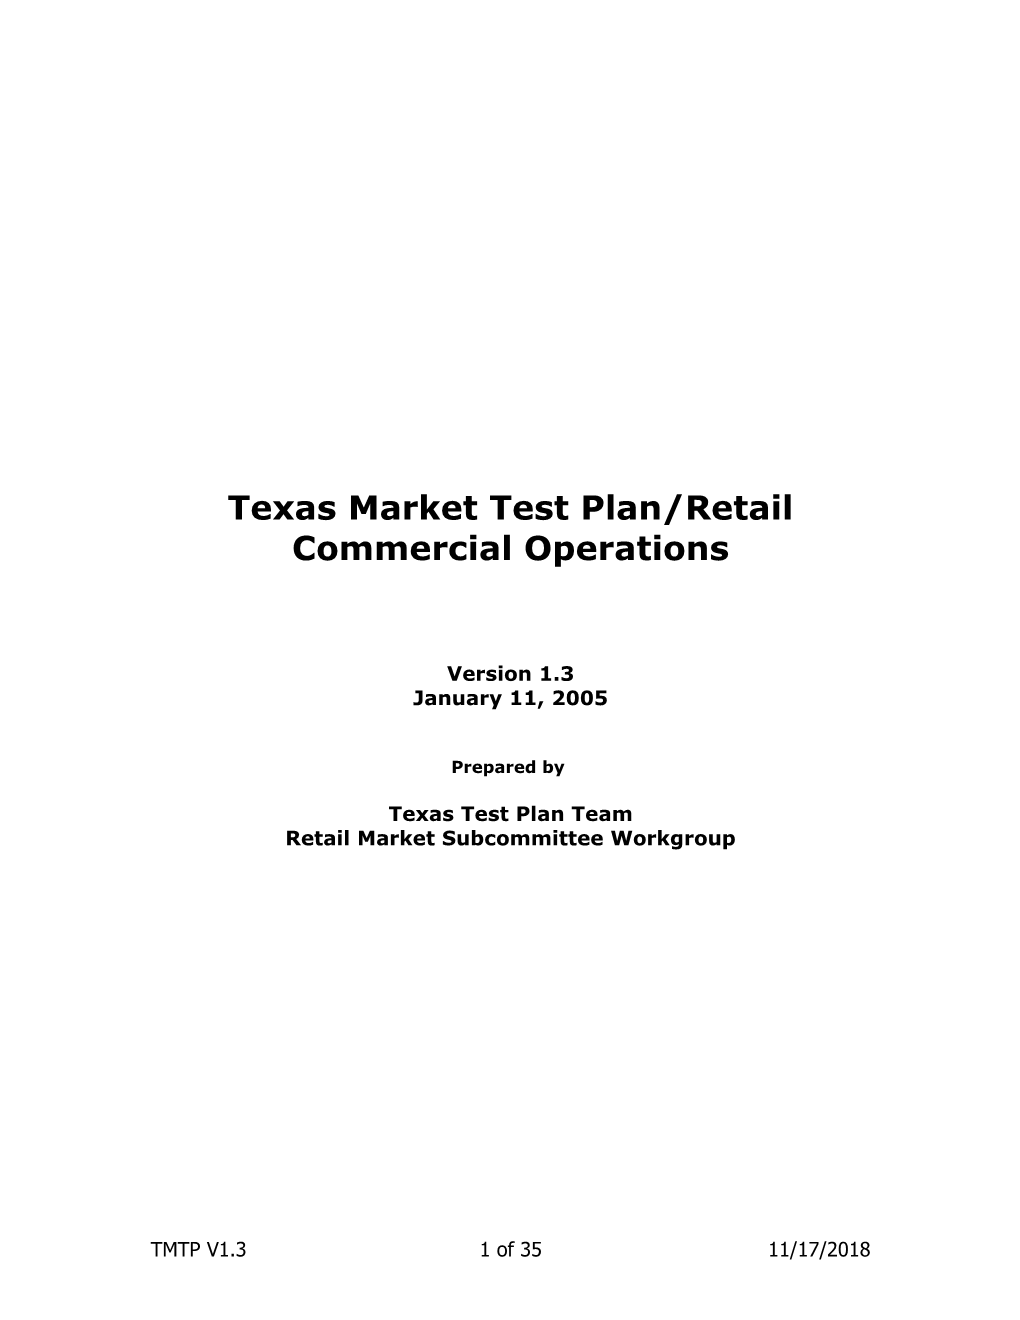 Texas Commercial Operations/Retail Marketplace Test Plan